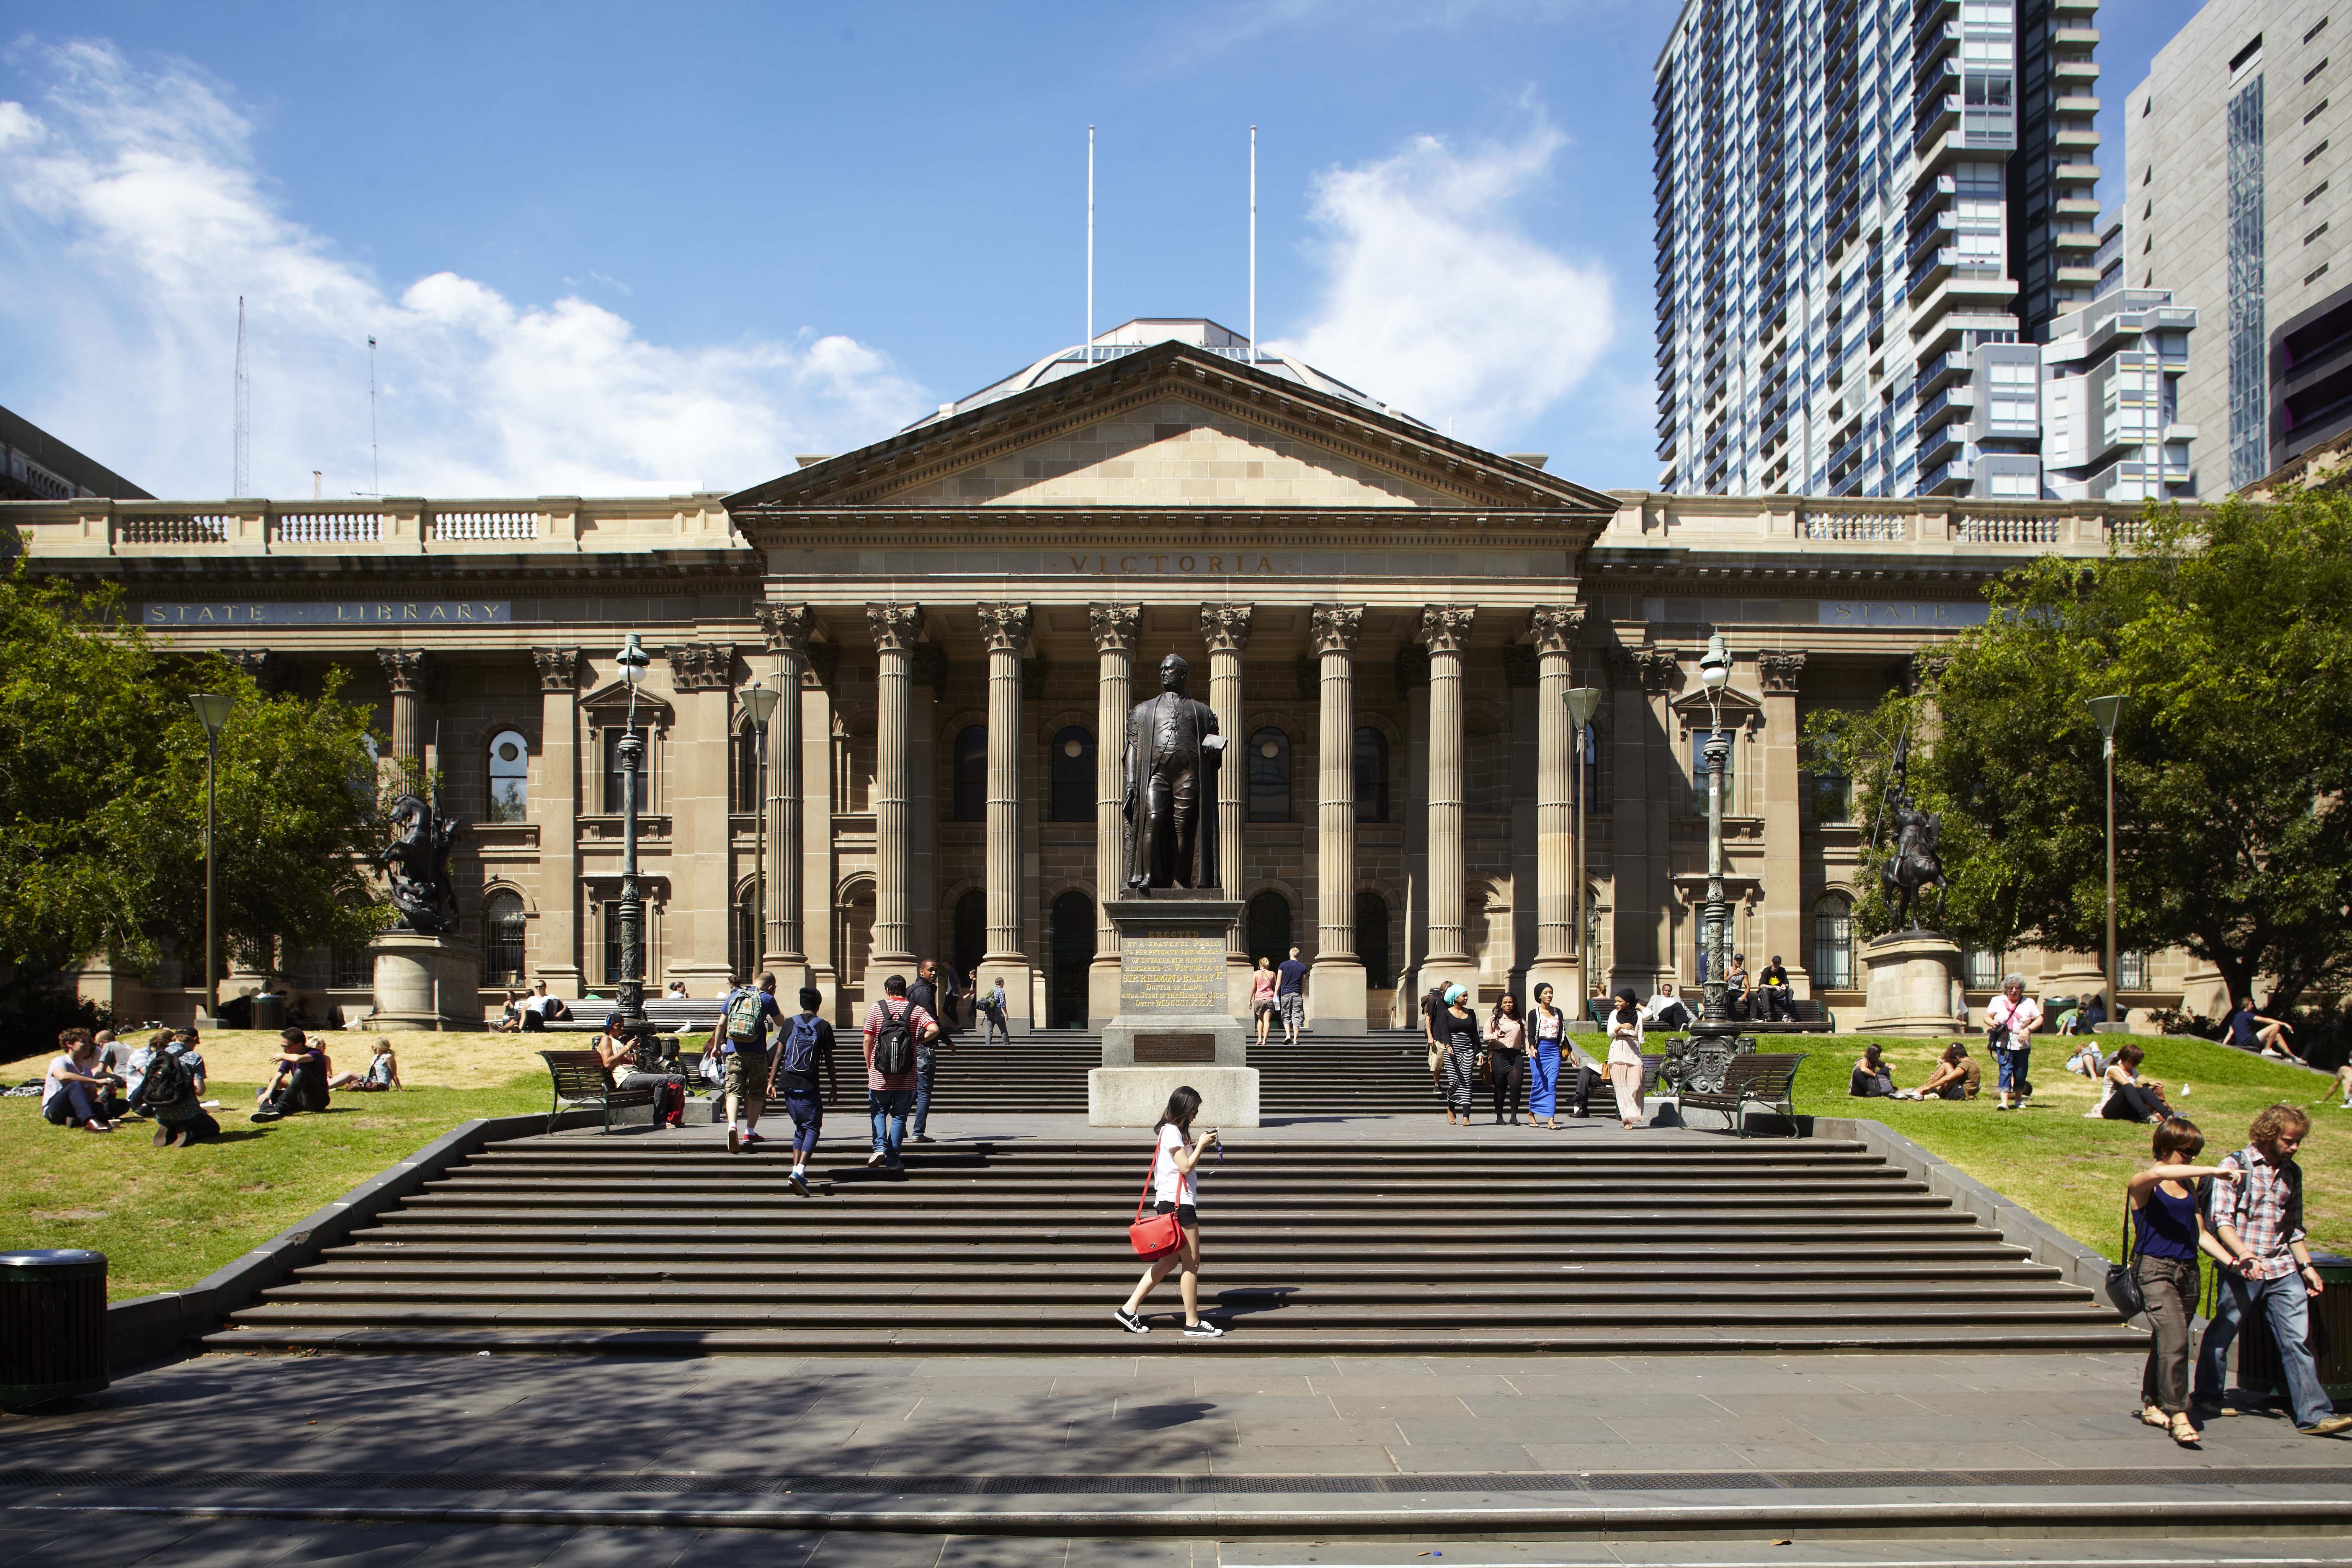 Front steps of the State Library of Victoria